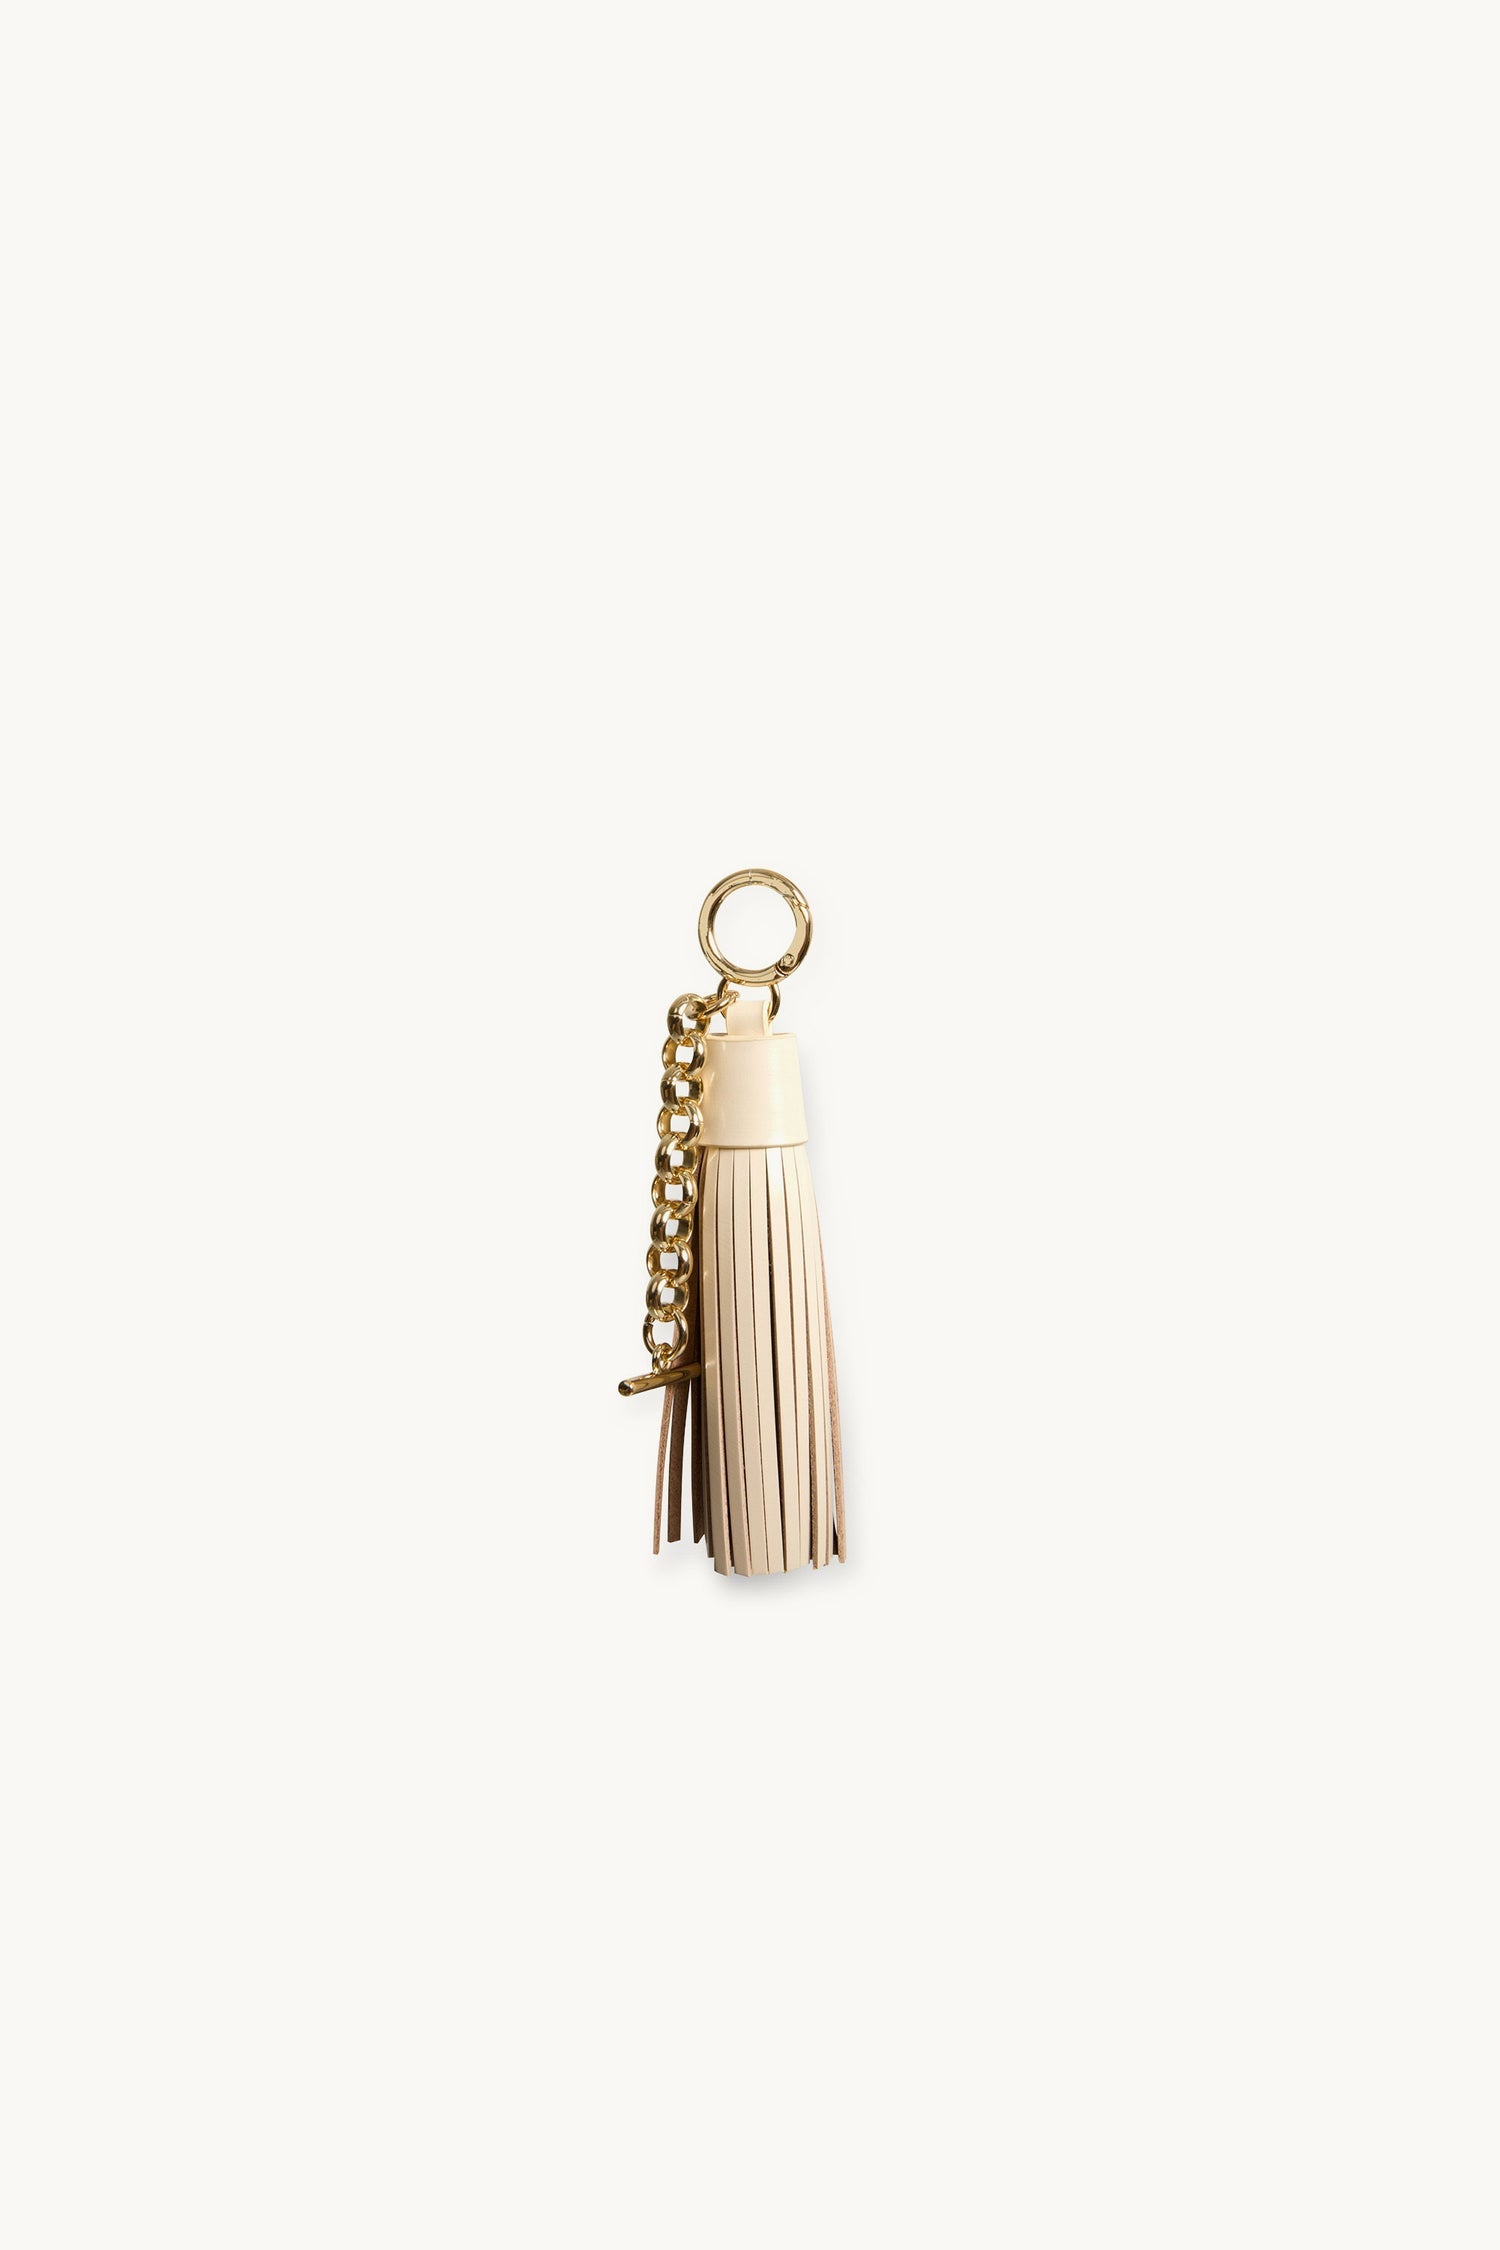 The Harlow Lux Keychain Cream + Light Gold